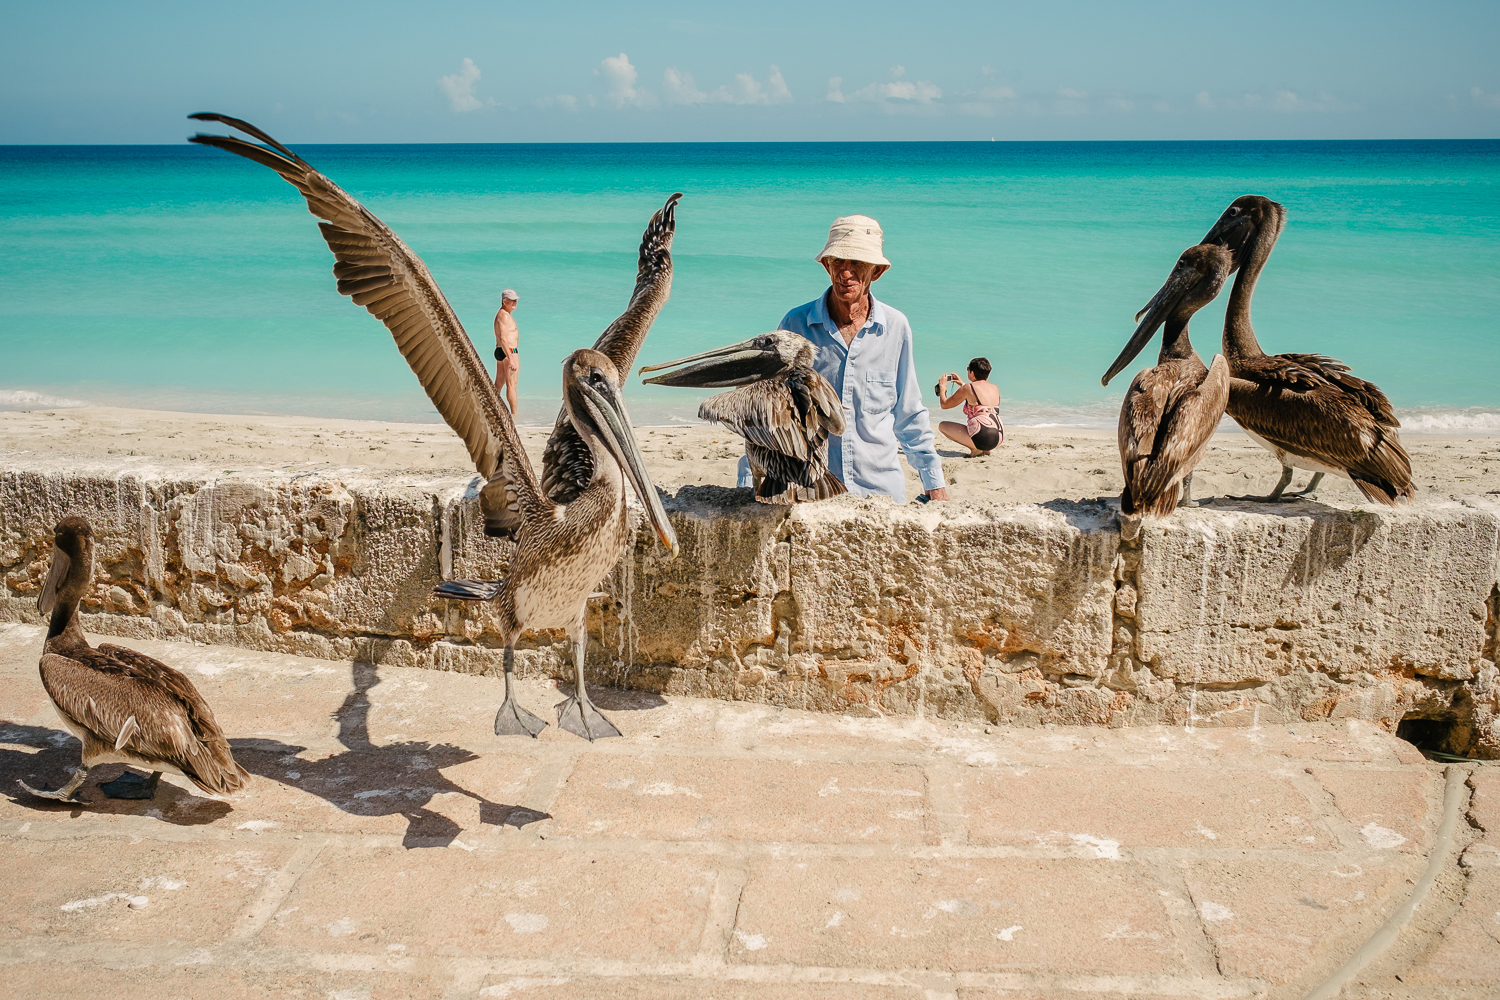  Man feeding pelicans on the beach in front of Al Capone's house in Varadero, Cuba 2015. 